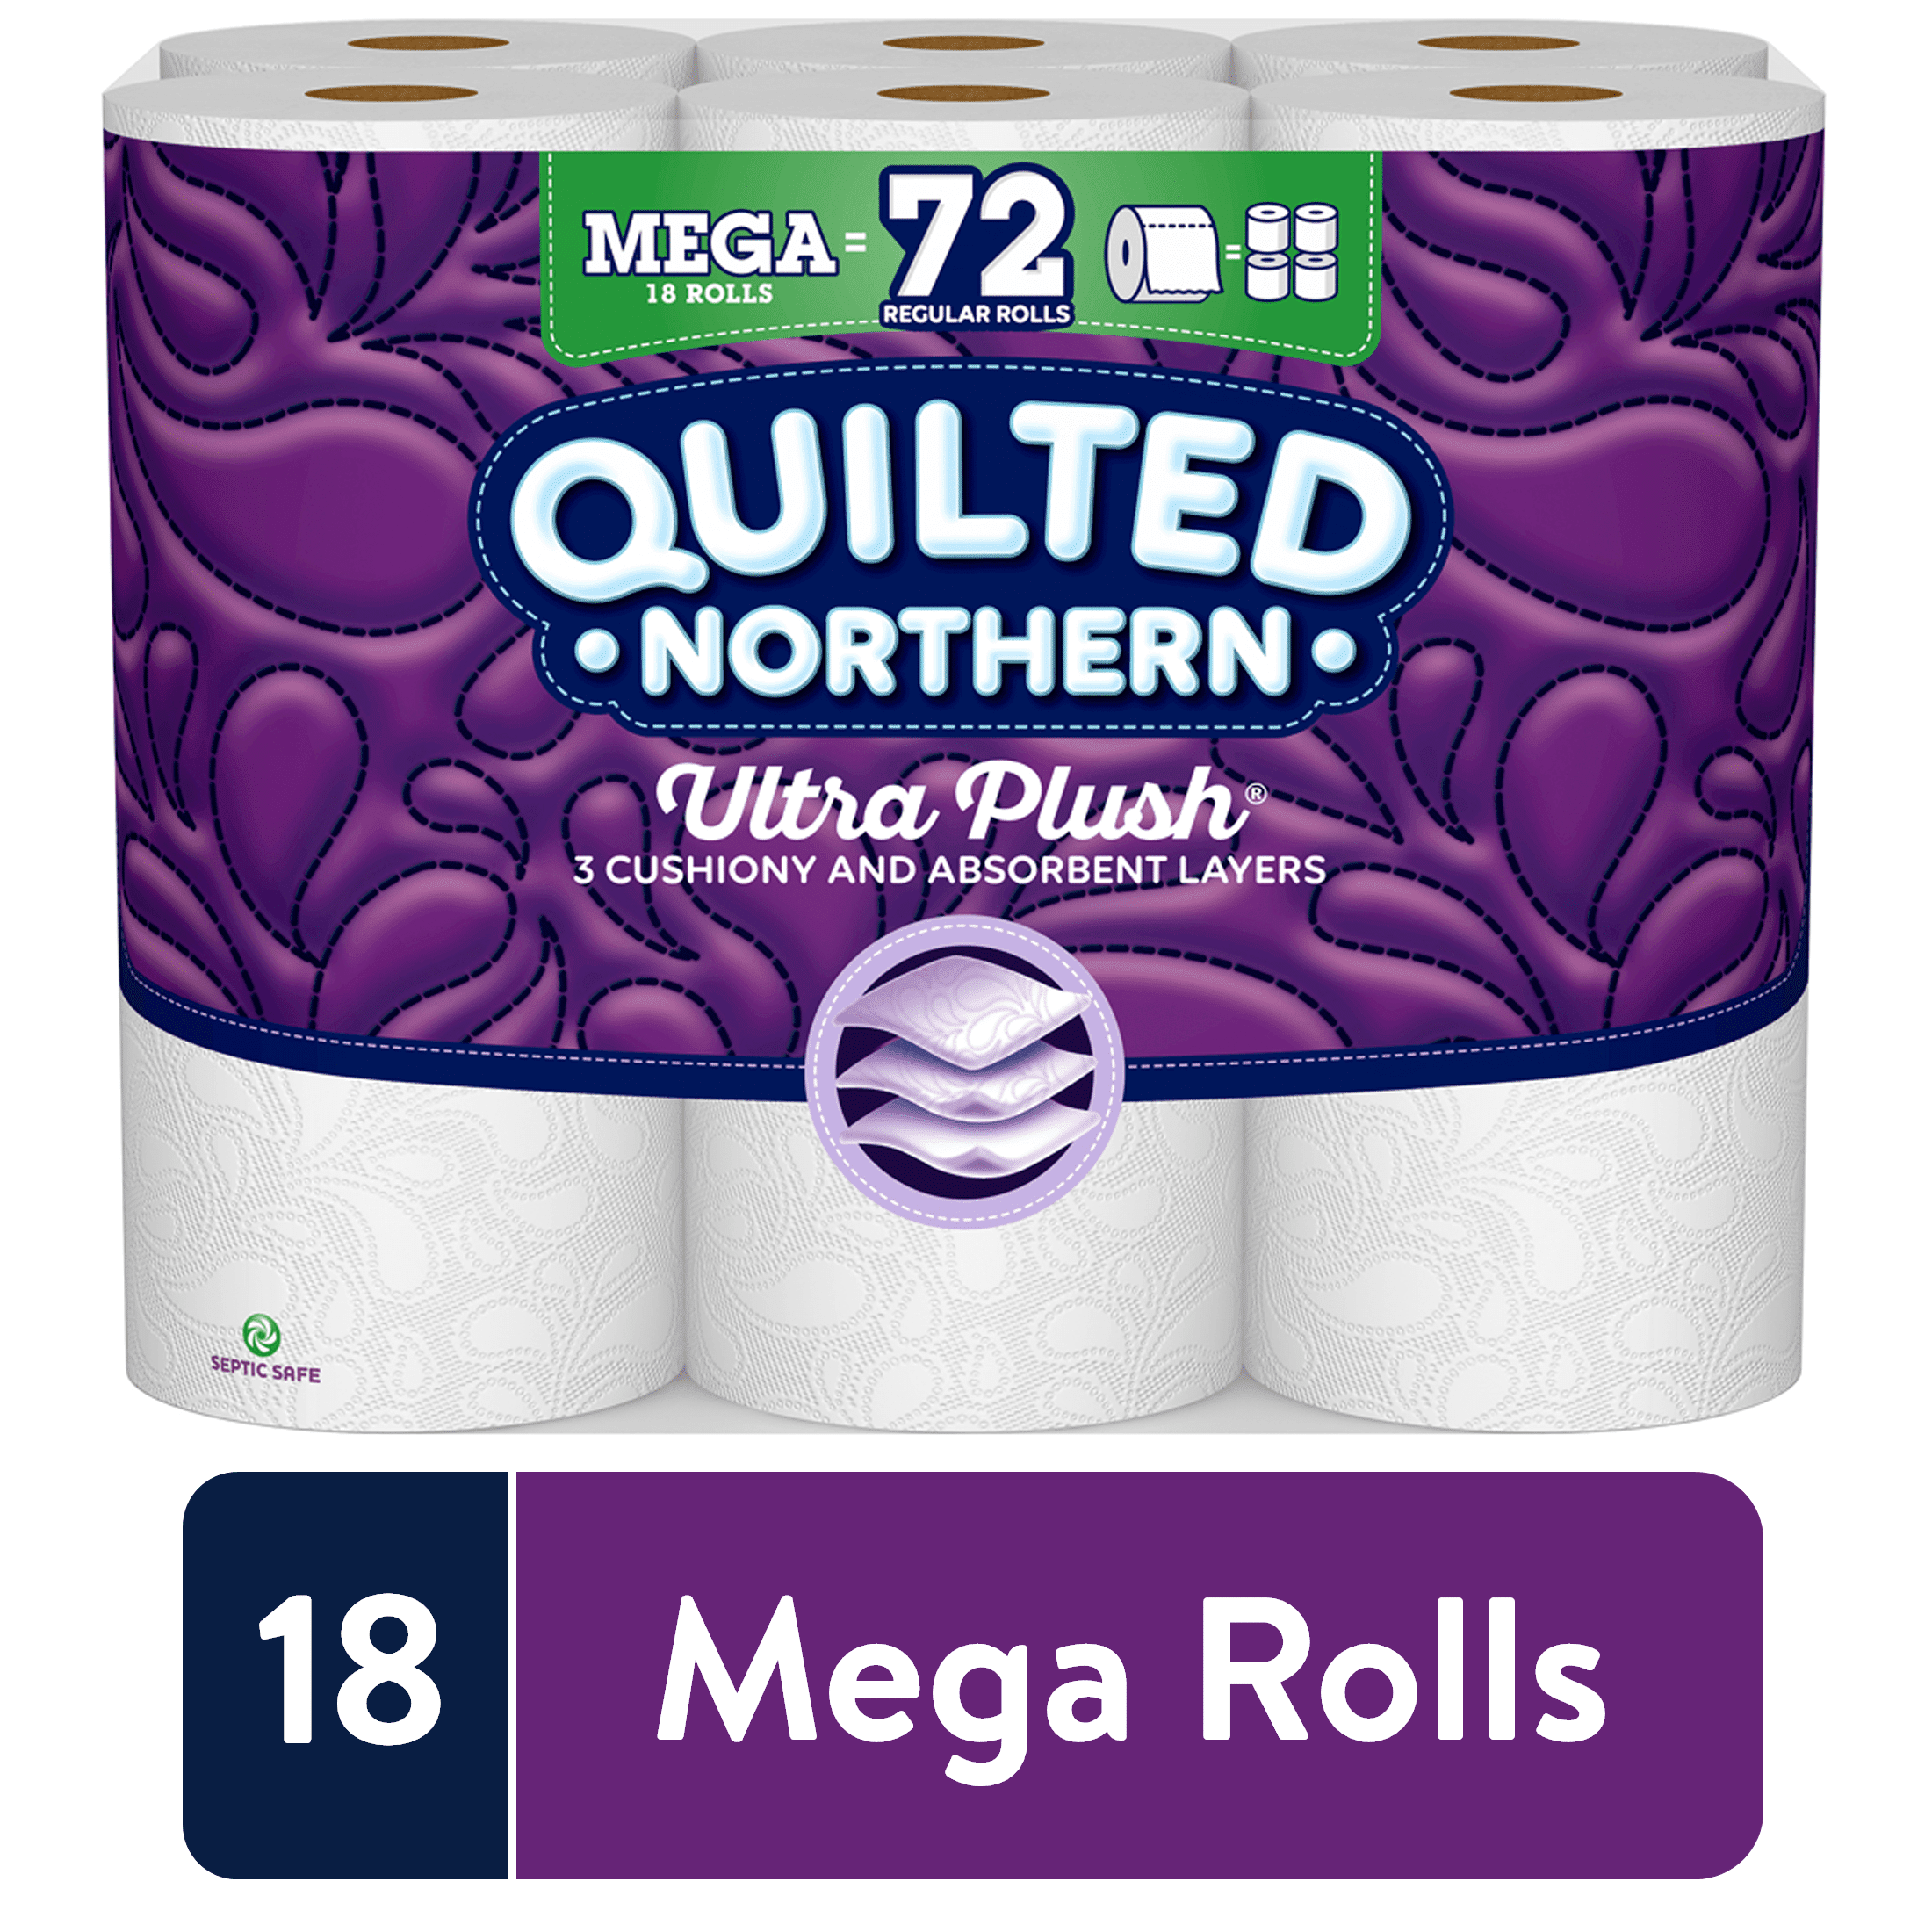 Quilted Northern Ultra Plush Bathroom Tissue, Unscented, Mega